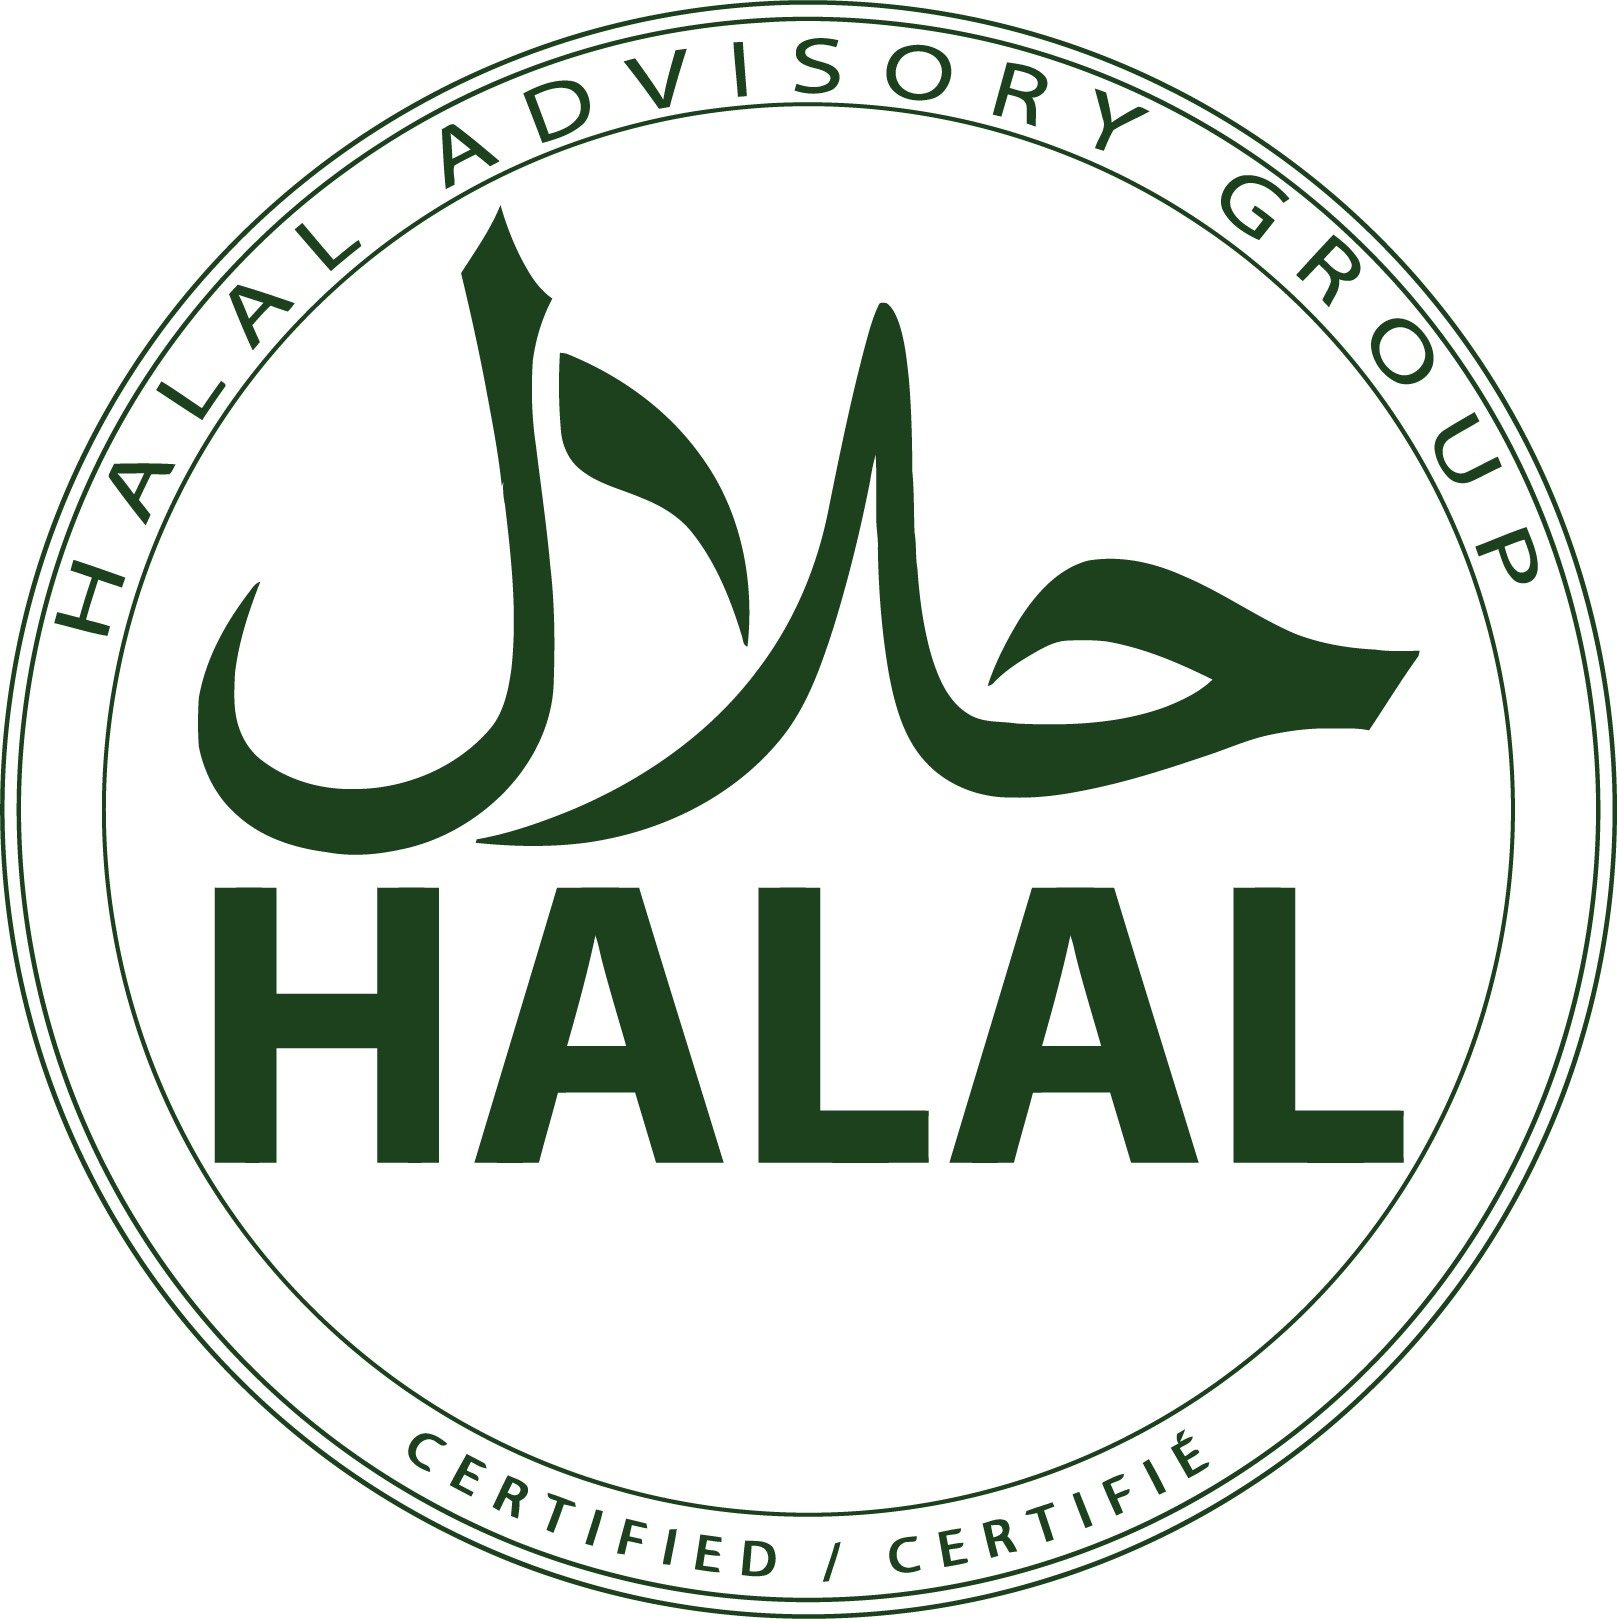 What does it mean to be Halal certified?